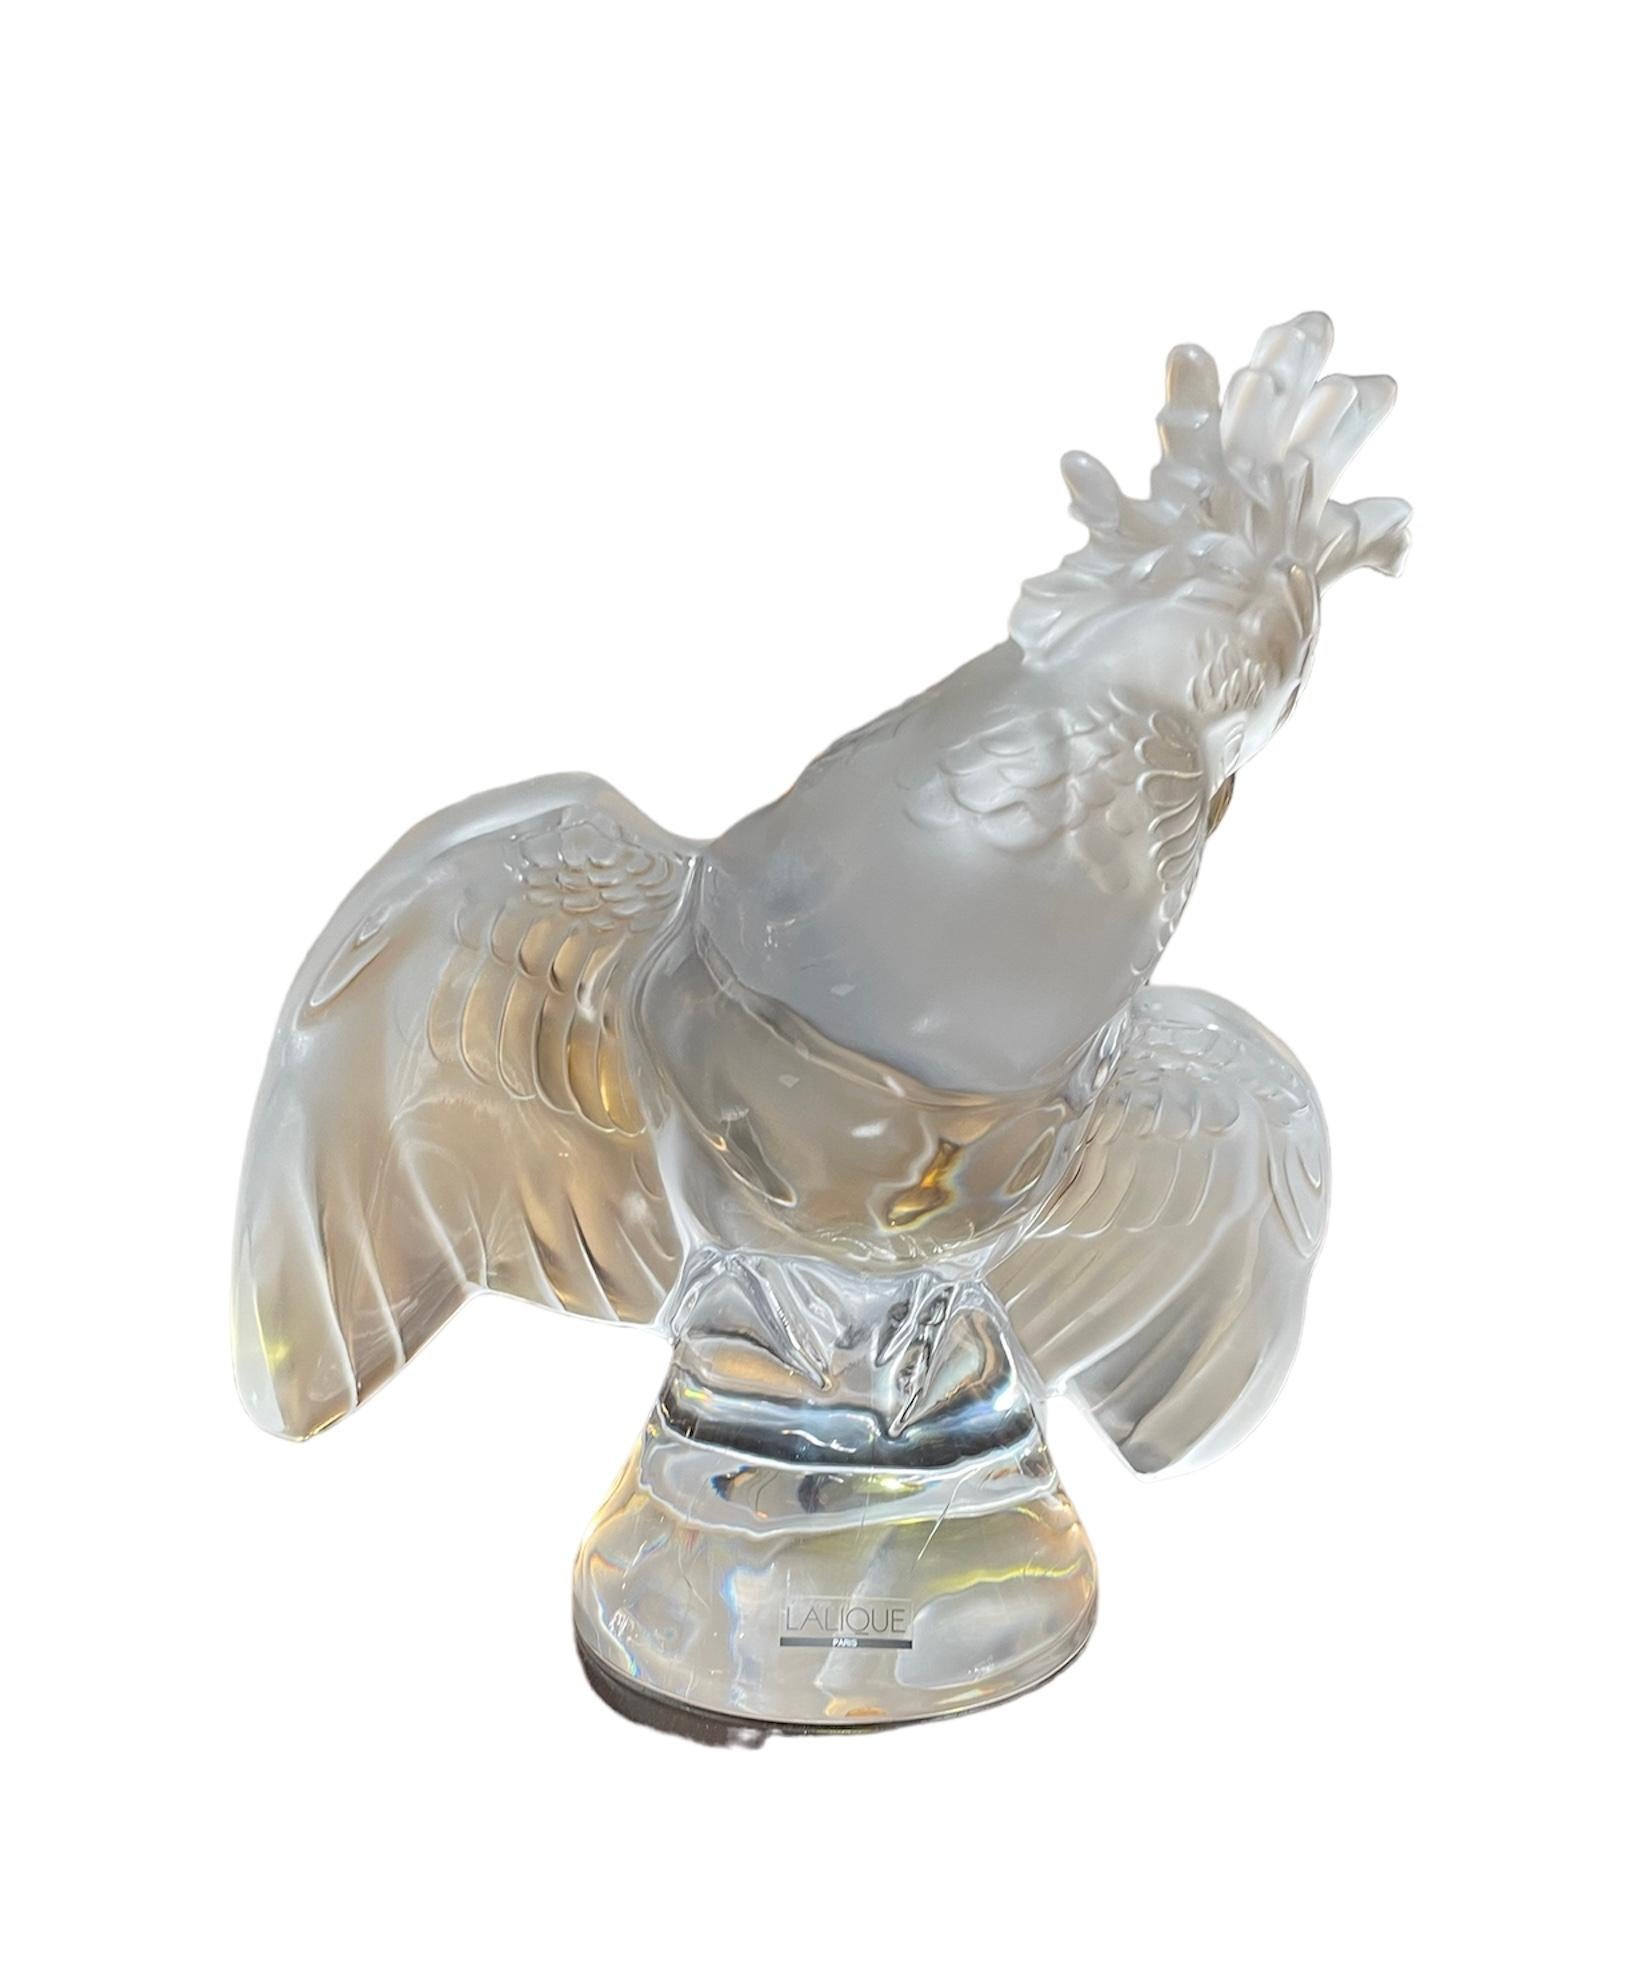 This a Lalique Crystal Cockatiel sculpture. It depicts a frosted and clear crystal loving cockatiel looking for an affectionate owner standing over a conical shaped clear crystal base. It is hallmarked Lalique encircled R and France in the back side